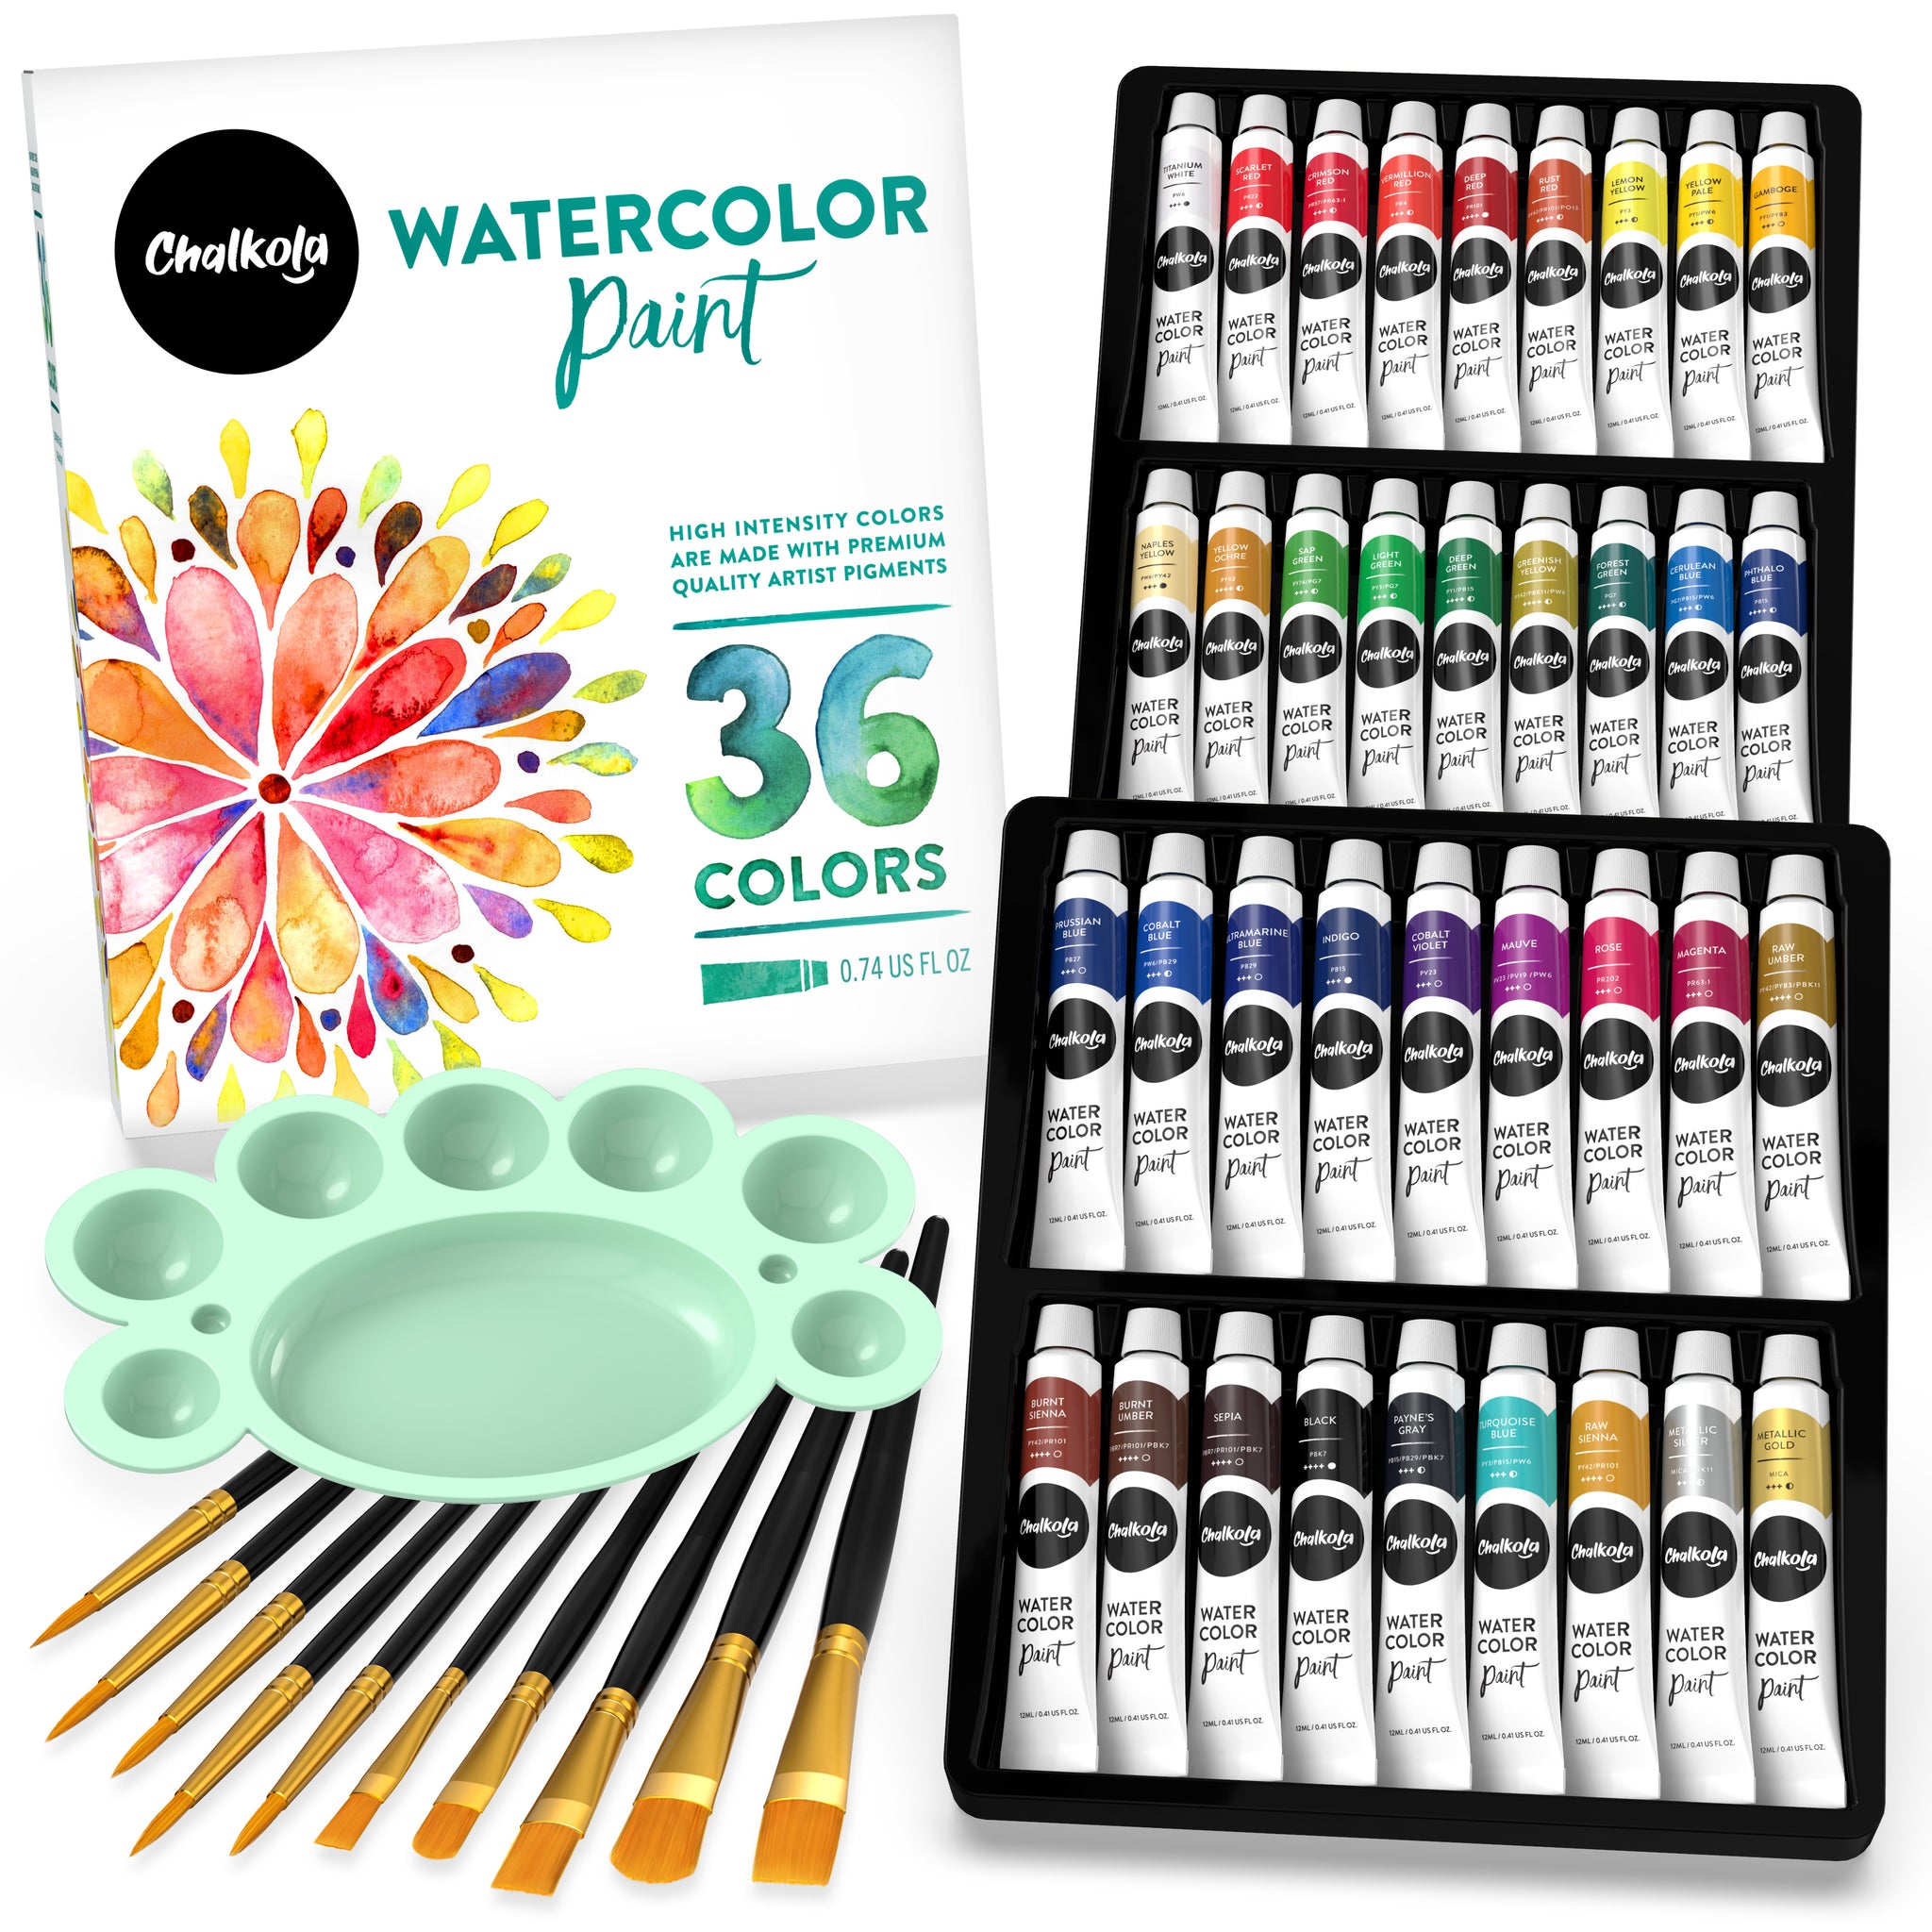 Startup Library: Painting With Watercolors